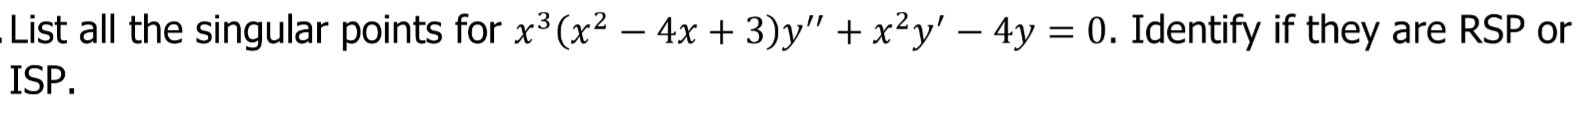 List all the singular points for x³ (x² – 4x + 3)y" + x²y' – 4y = 0. Identify if they are RSP or
ISP.
